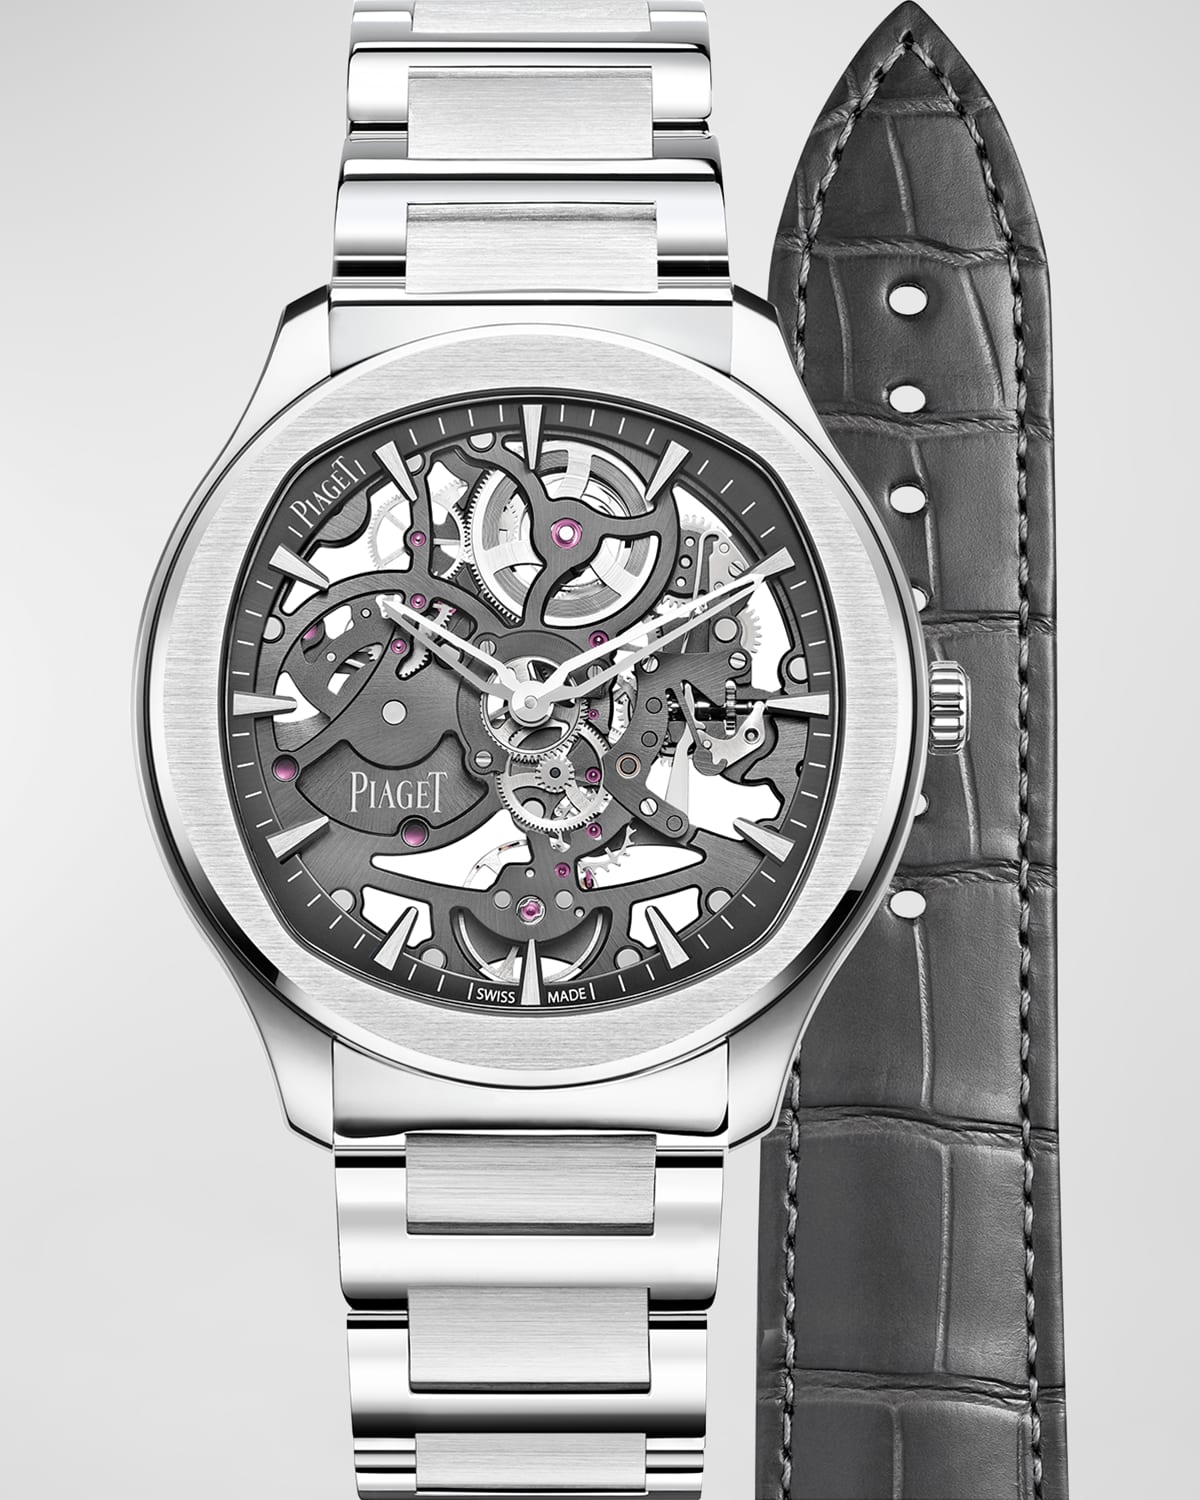 PIAGET POLO 42MM STAINLESS STEEL GREY SKELETON WATCH